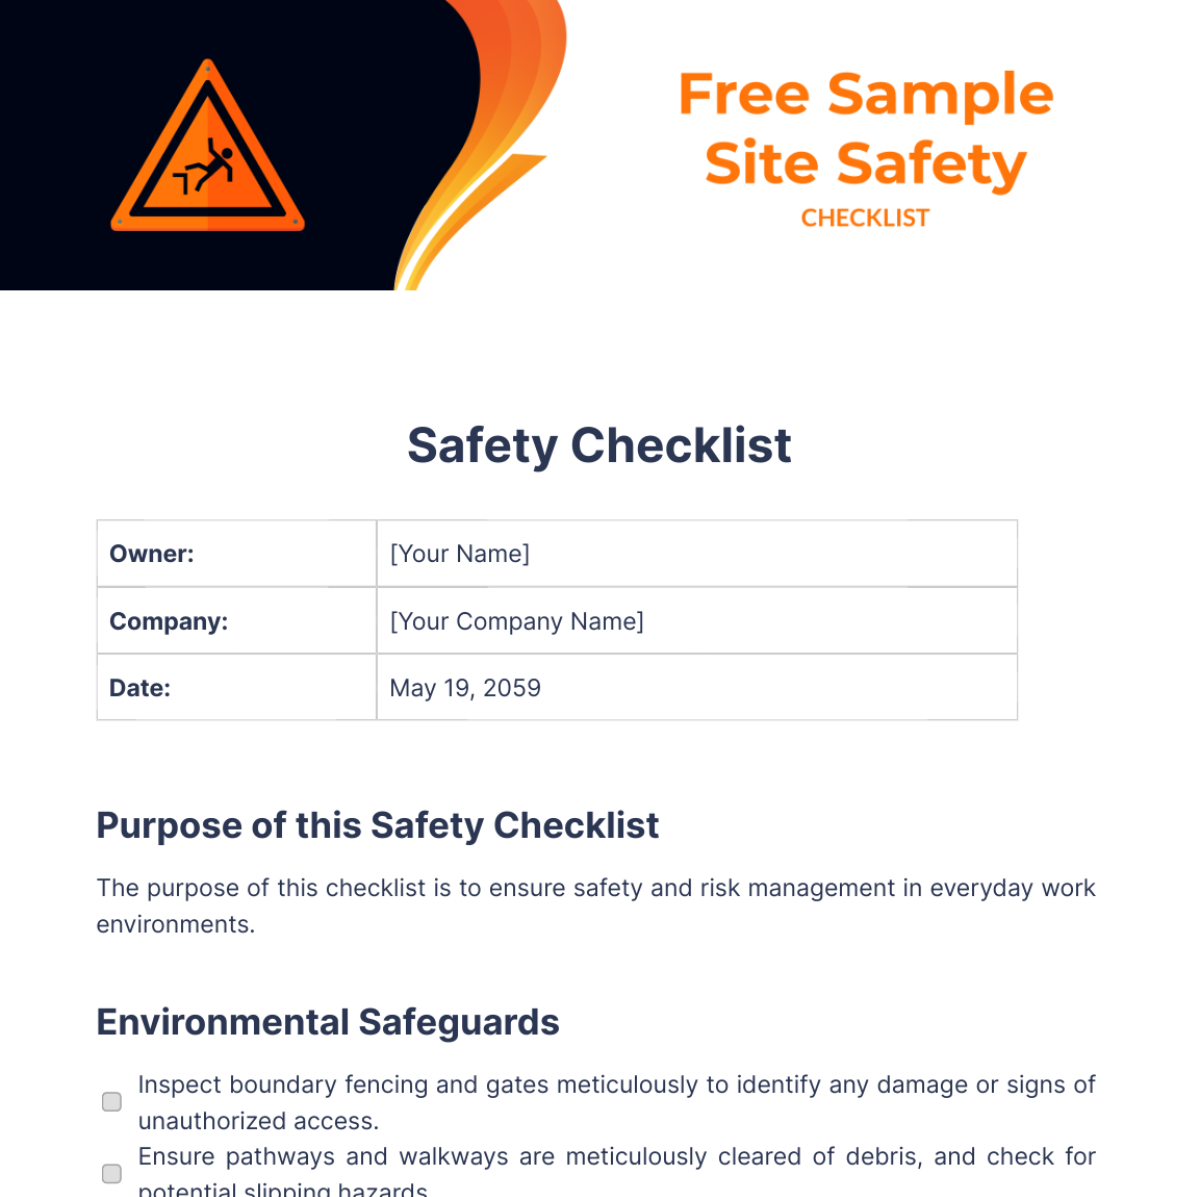 Free Sample Site Safety Checklist Template